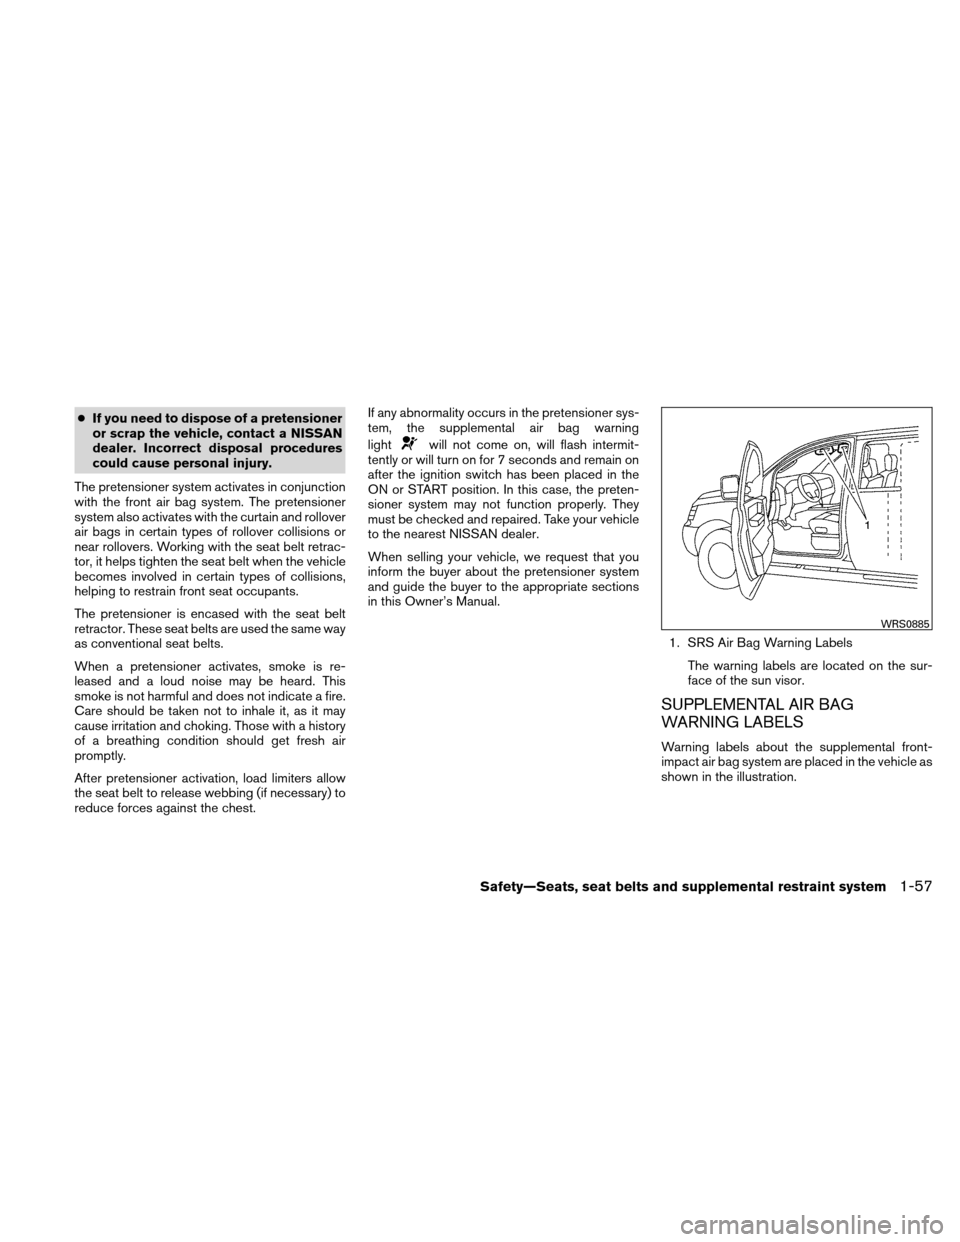 NISSAN XTERRA 2011 N50 / 2.G Manual PDF ●If you need to dispose of a pretensioner
or scrap the vehicle, contact a NISSAN
dealer. Incorrect disposal procedures
could cause personal injury.
The pretensioner system activates in conjunction
w